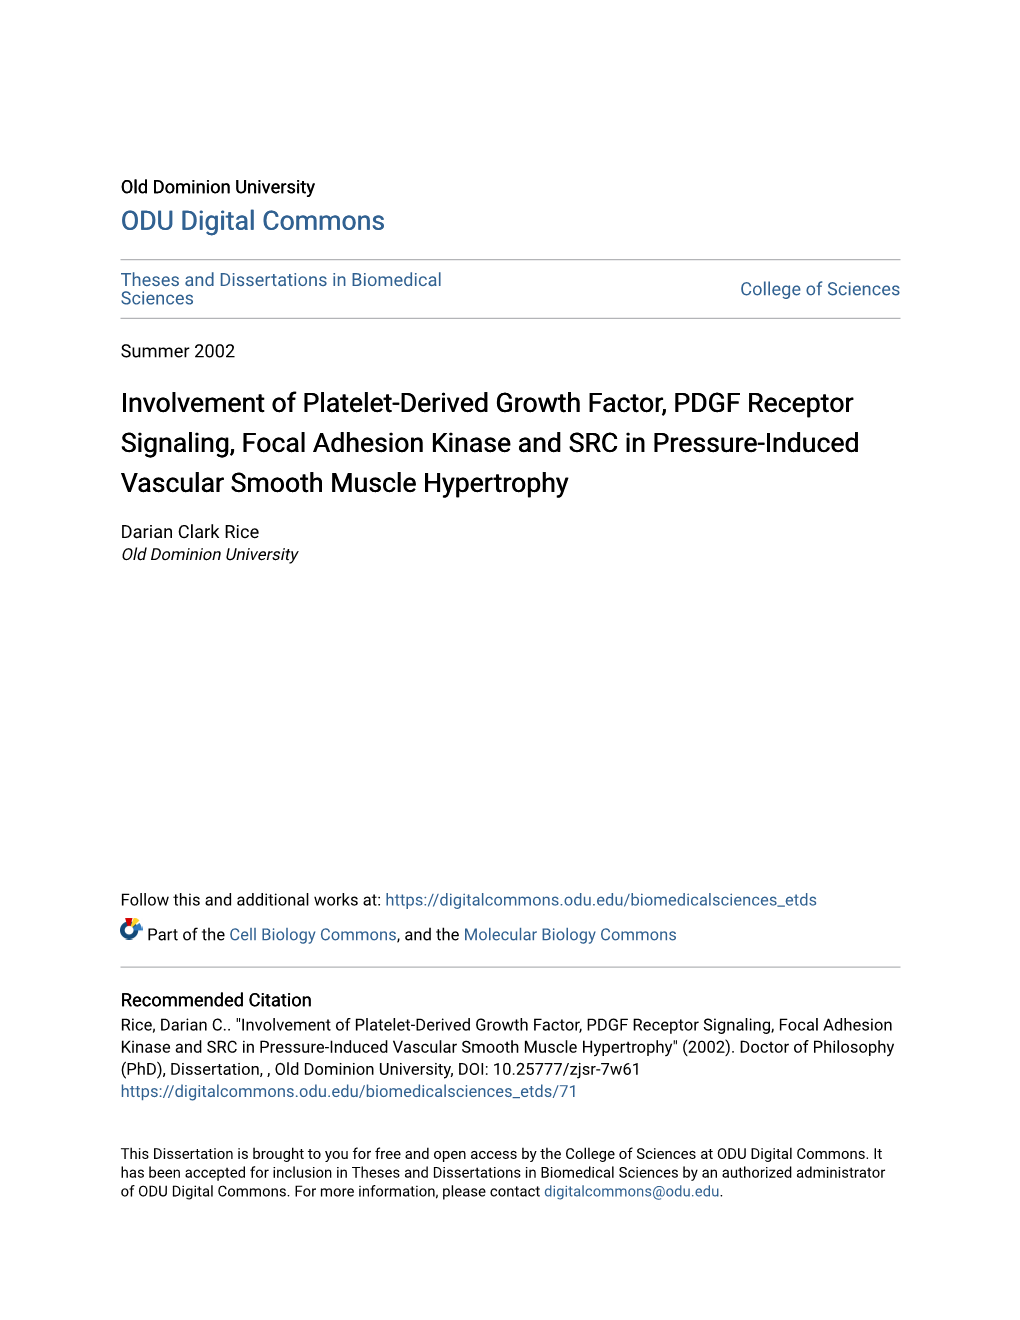 Involvement of Platelet-Derived Growth Factor, PDGF Receptor Signaling, Focal Adhesion Kinase and SRC in Pressure-Induced Vascular Smooth Muscle Hypertrophy